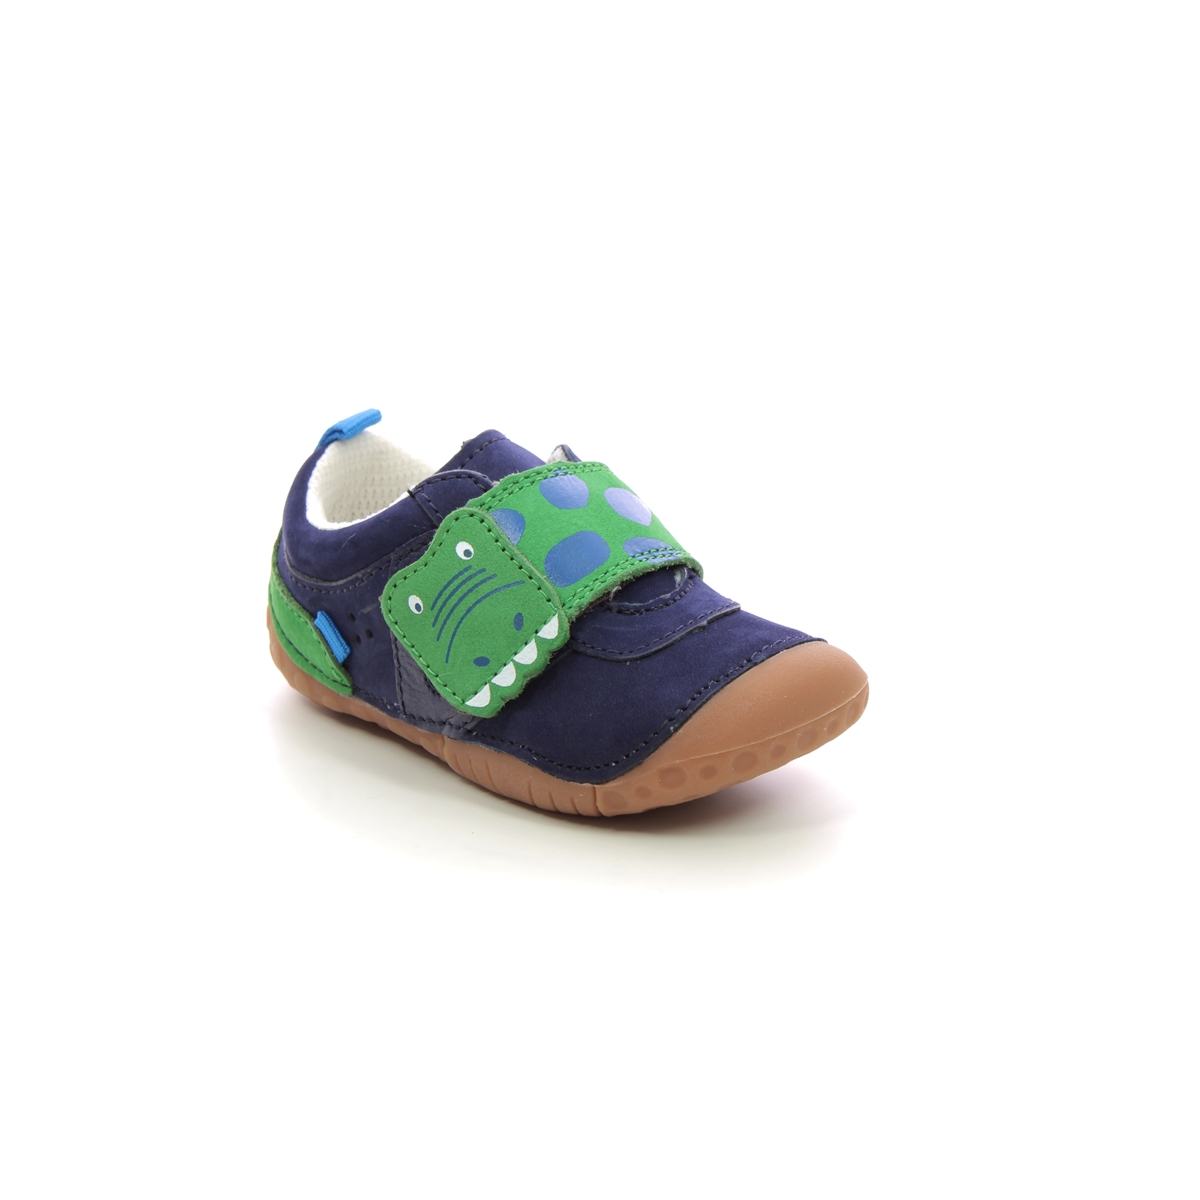 Start Rite - Little Mate 1V In Navy Leather 0819-97G In Size 3 In Plain Navy Leather Boys First And Toddler Shoes  In Navy Leather For kids